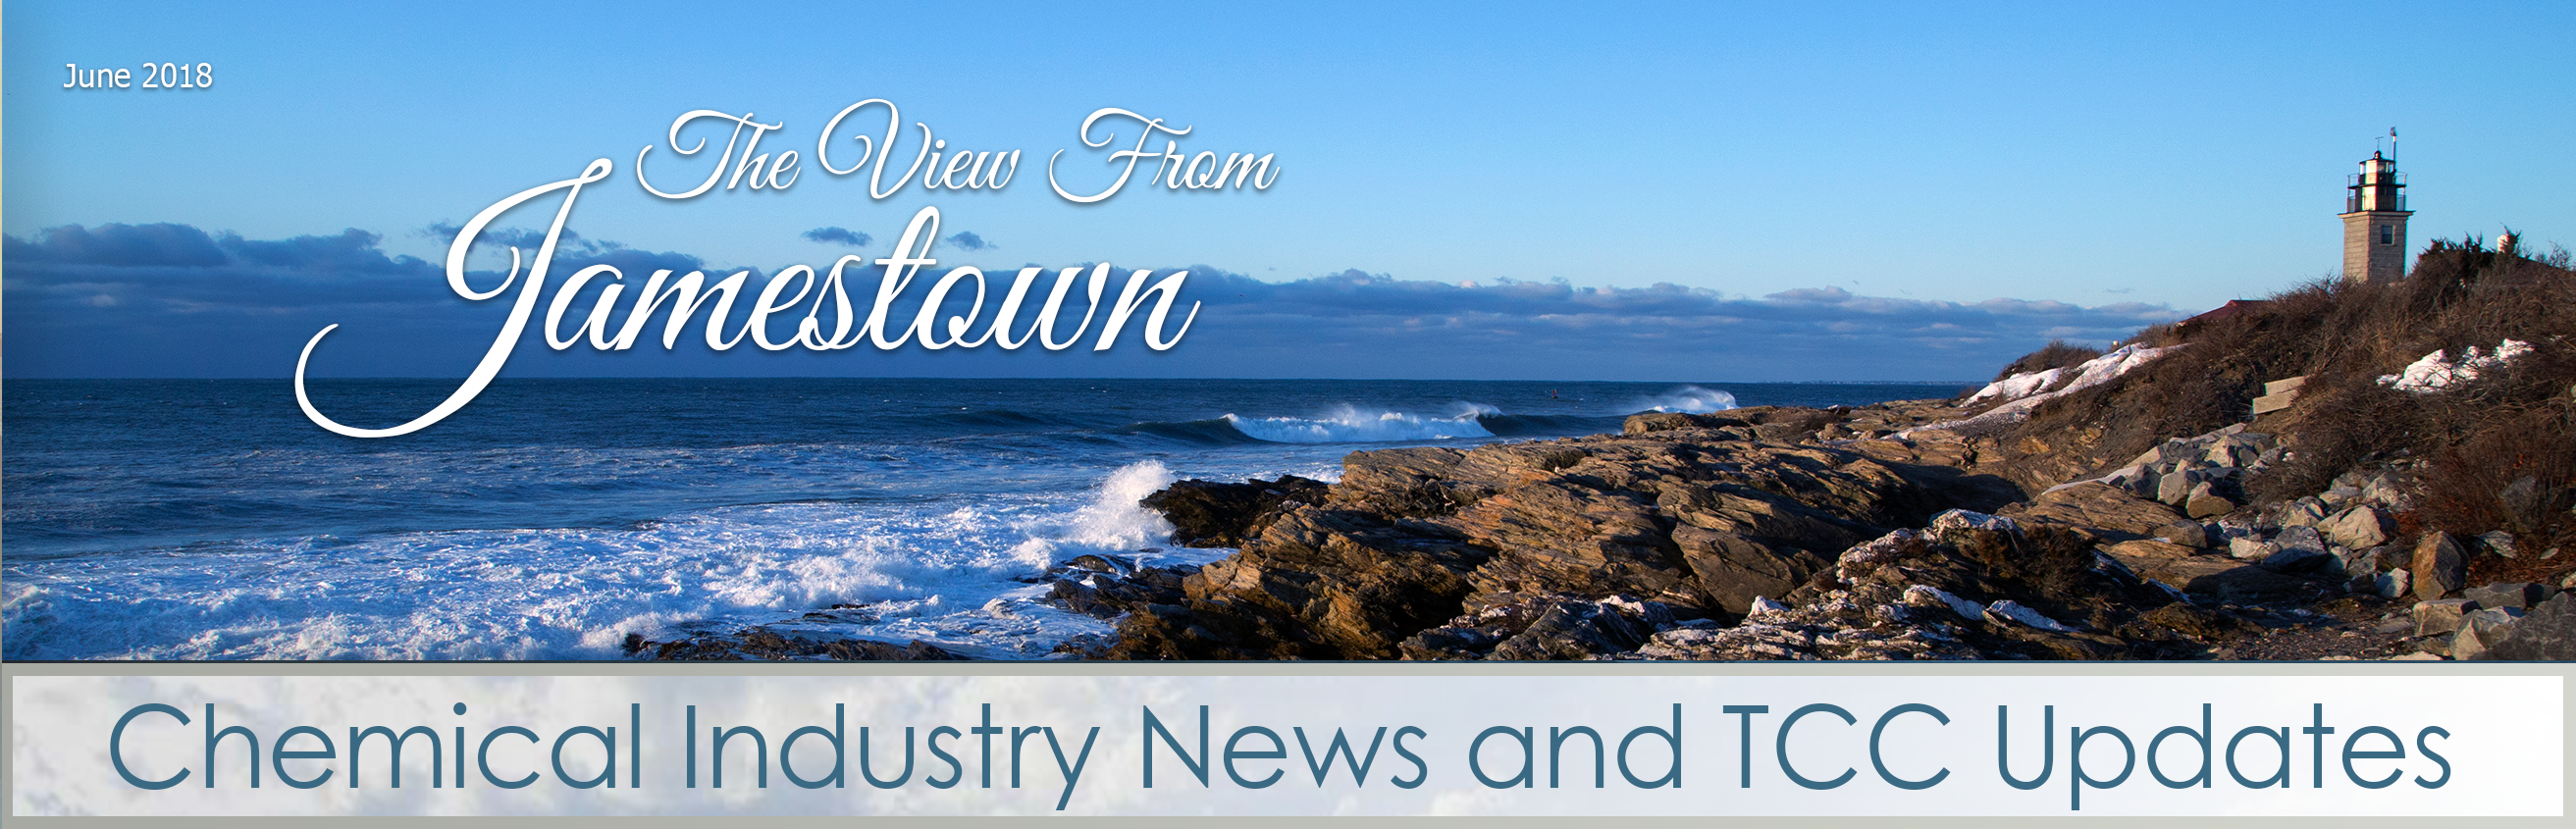 June 18 The View from Jamestown - The Chemical Company | Chemical Distributor